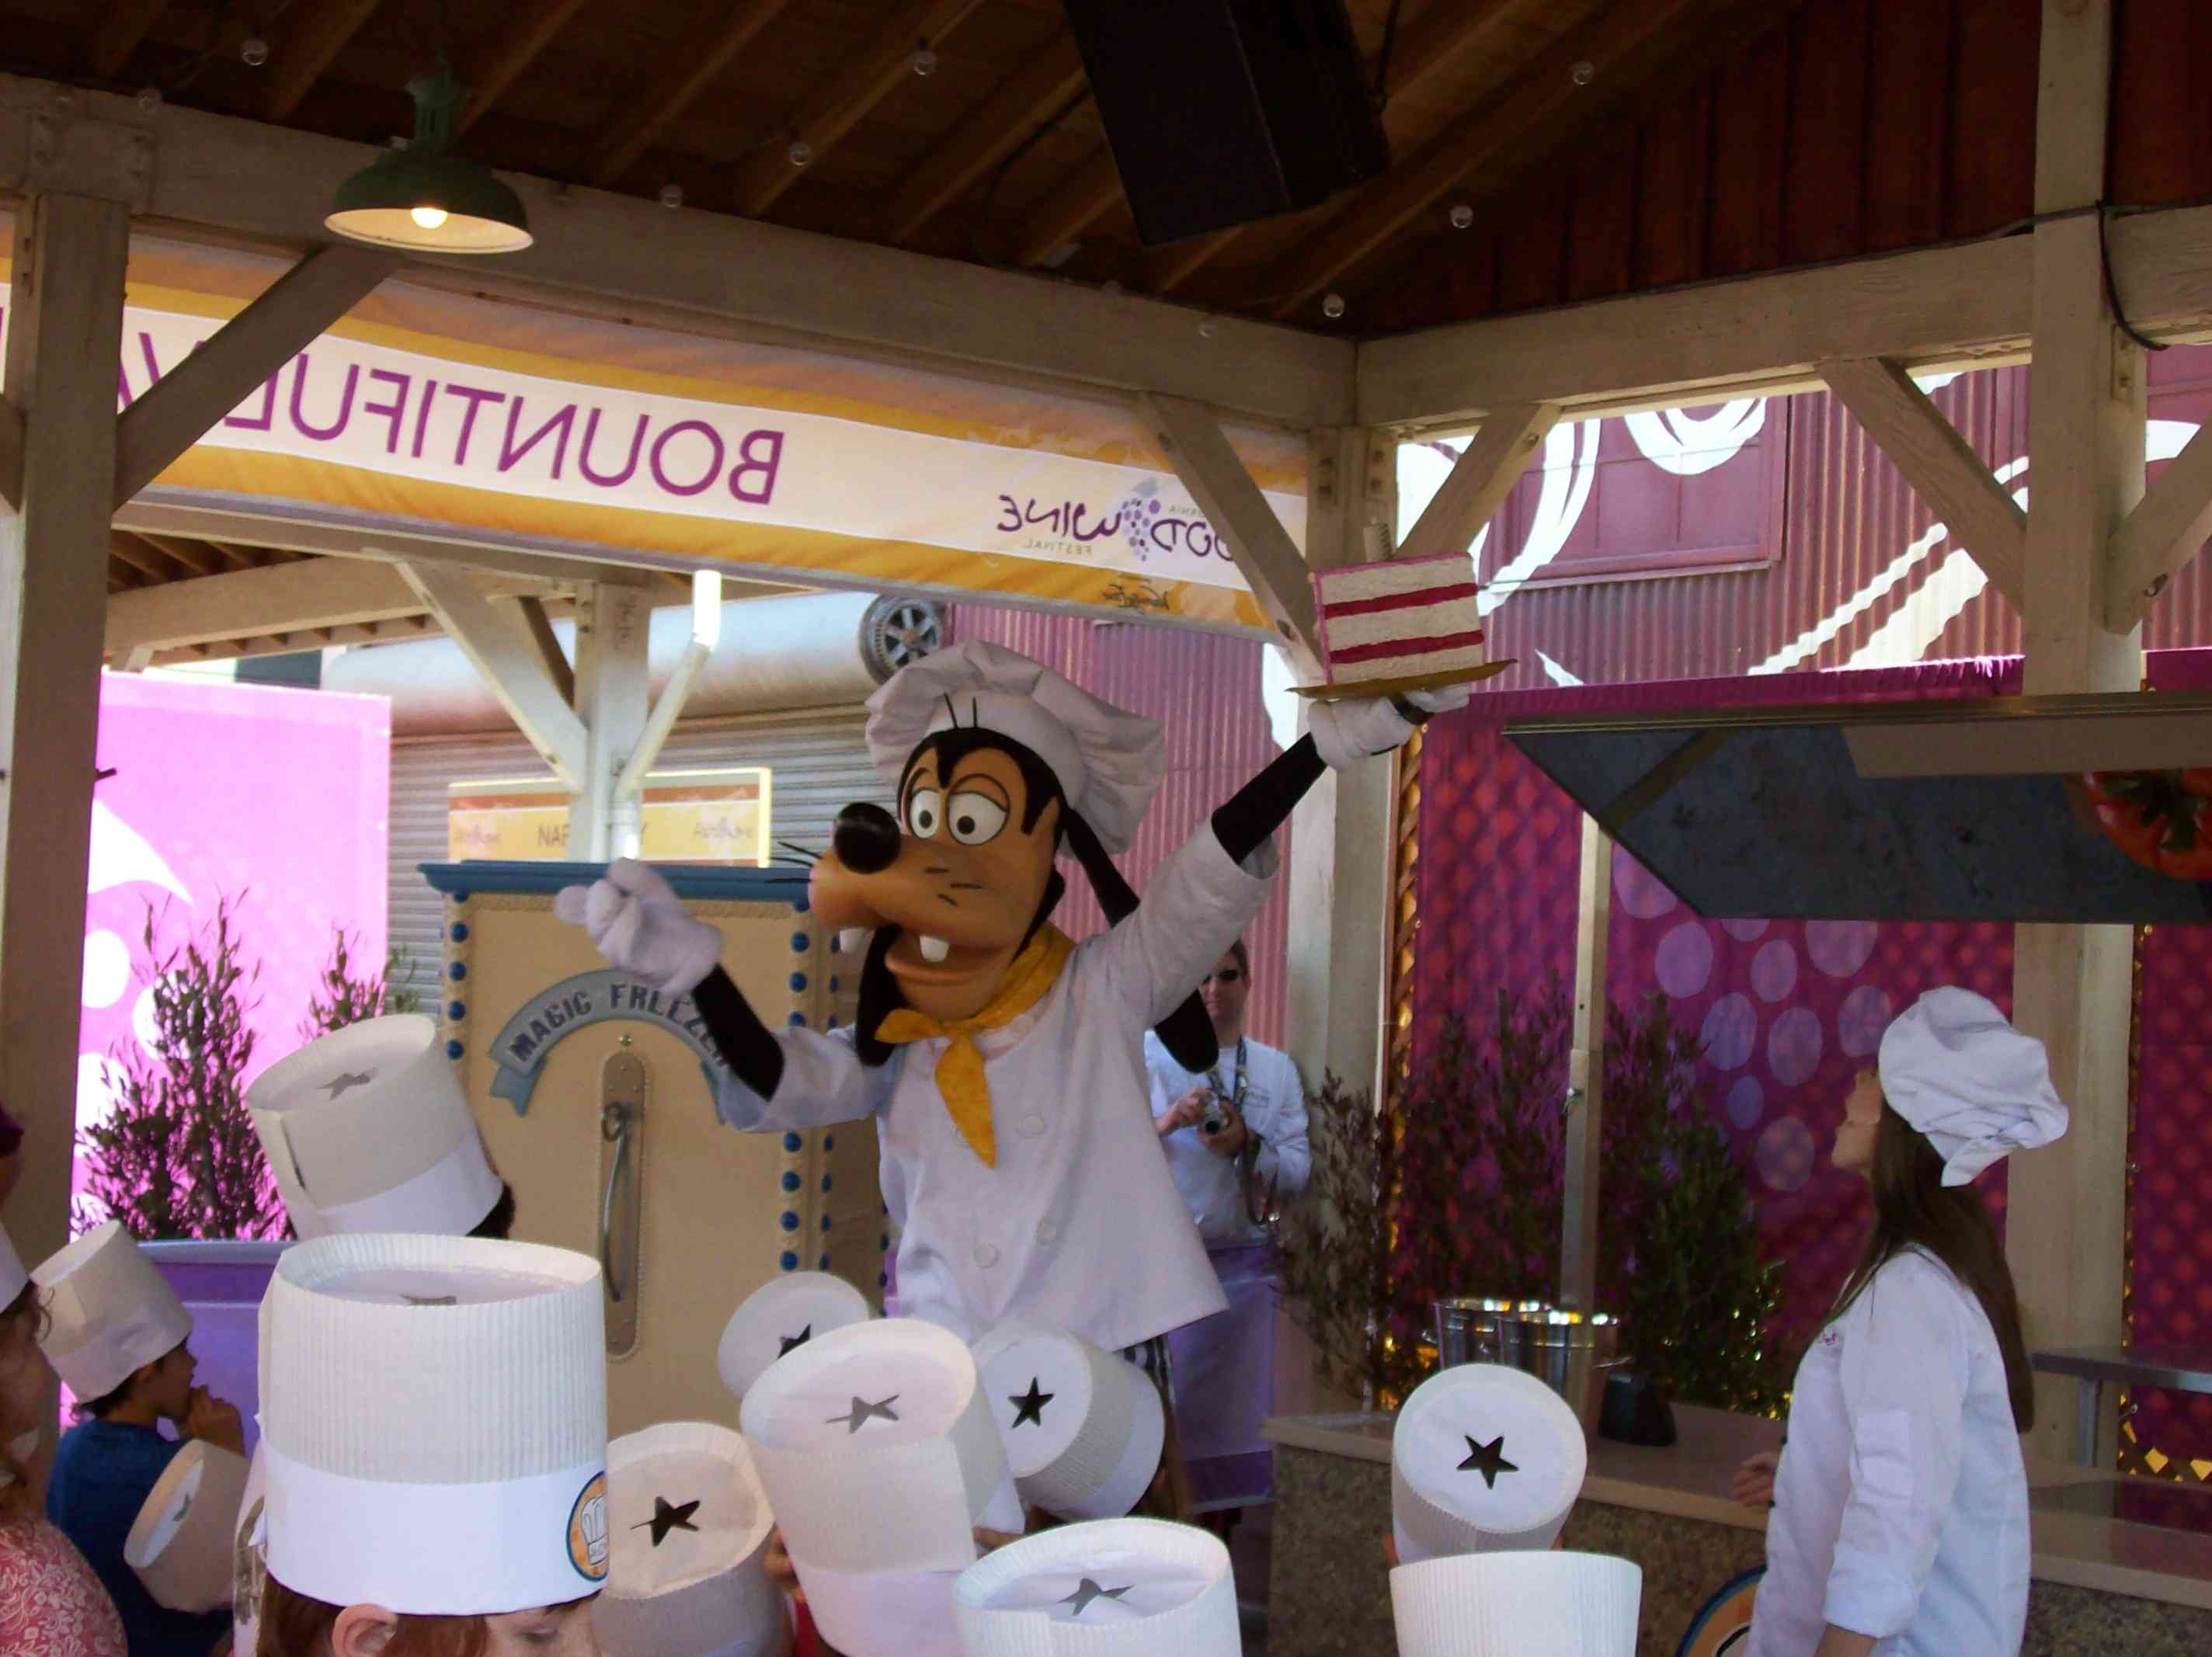 Chef Goofy tries to get the kids to make an unhealthy snack.